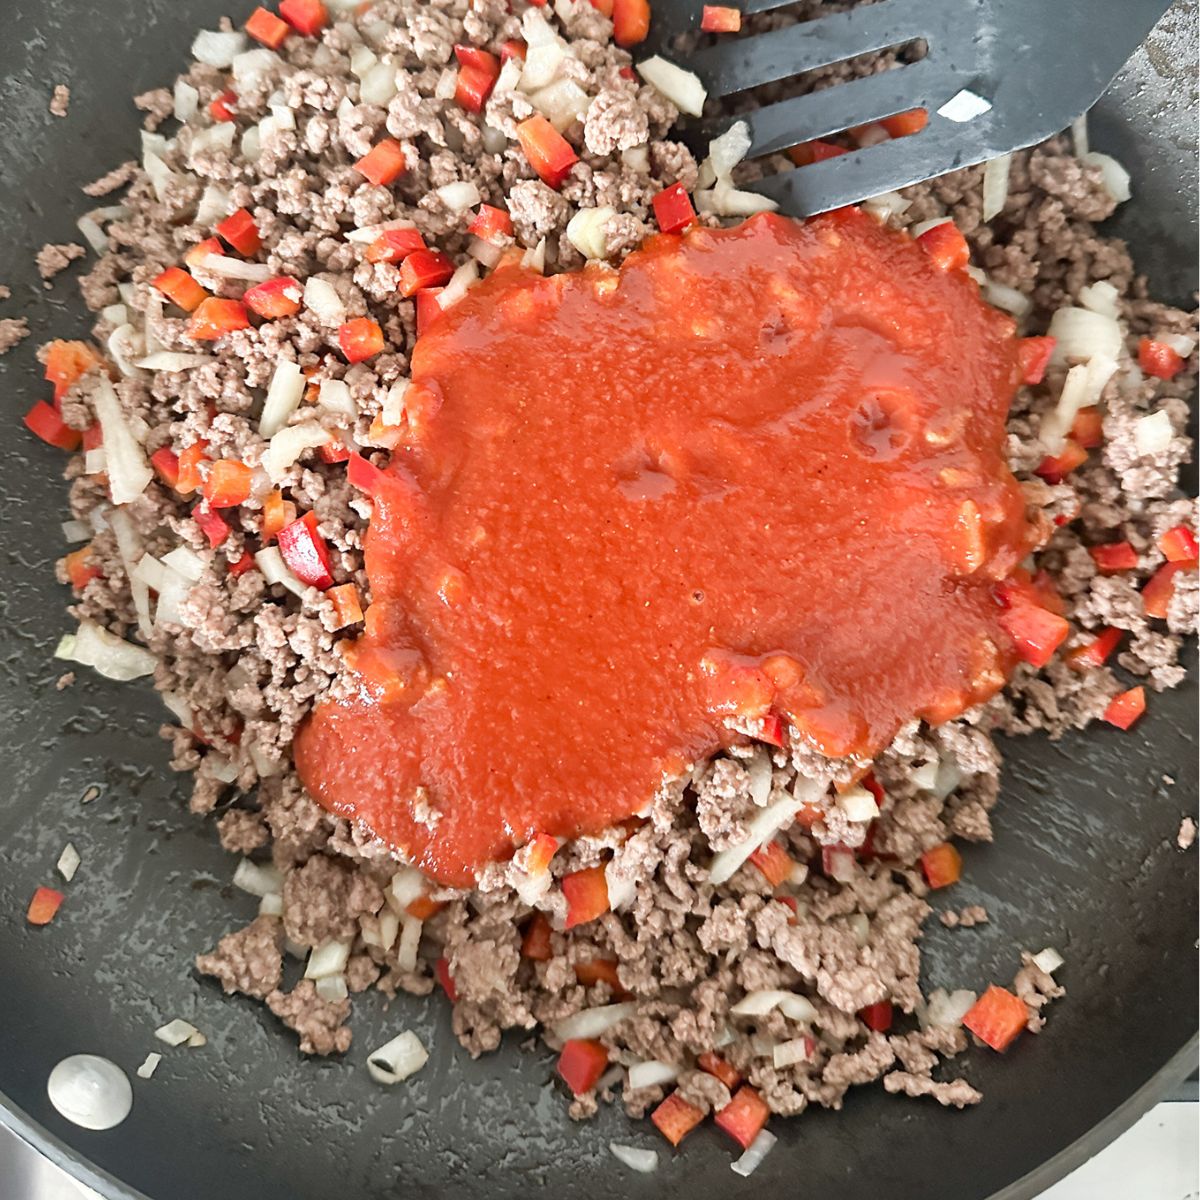 Skillet with ground beef and tomato sauce.